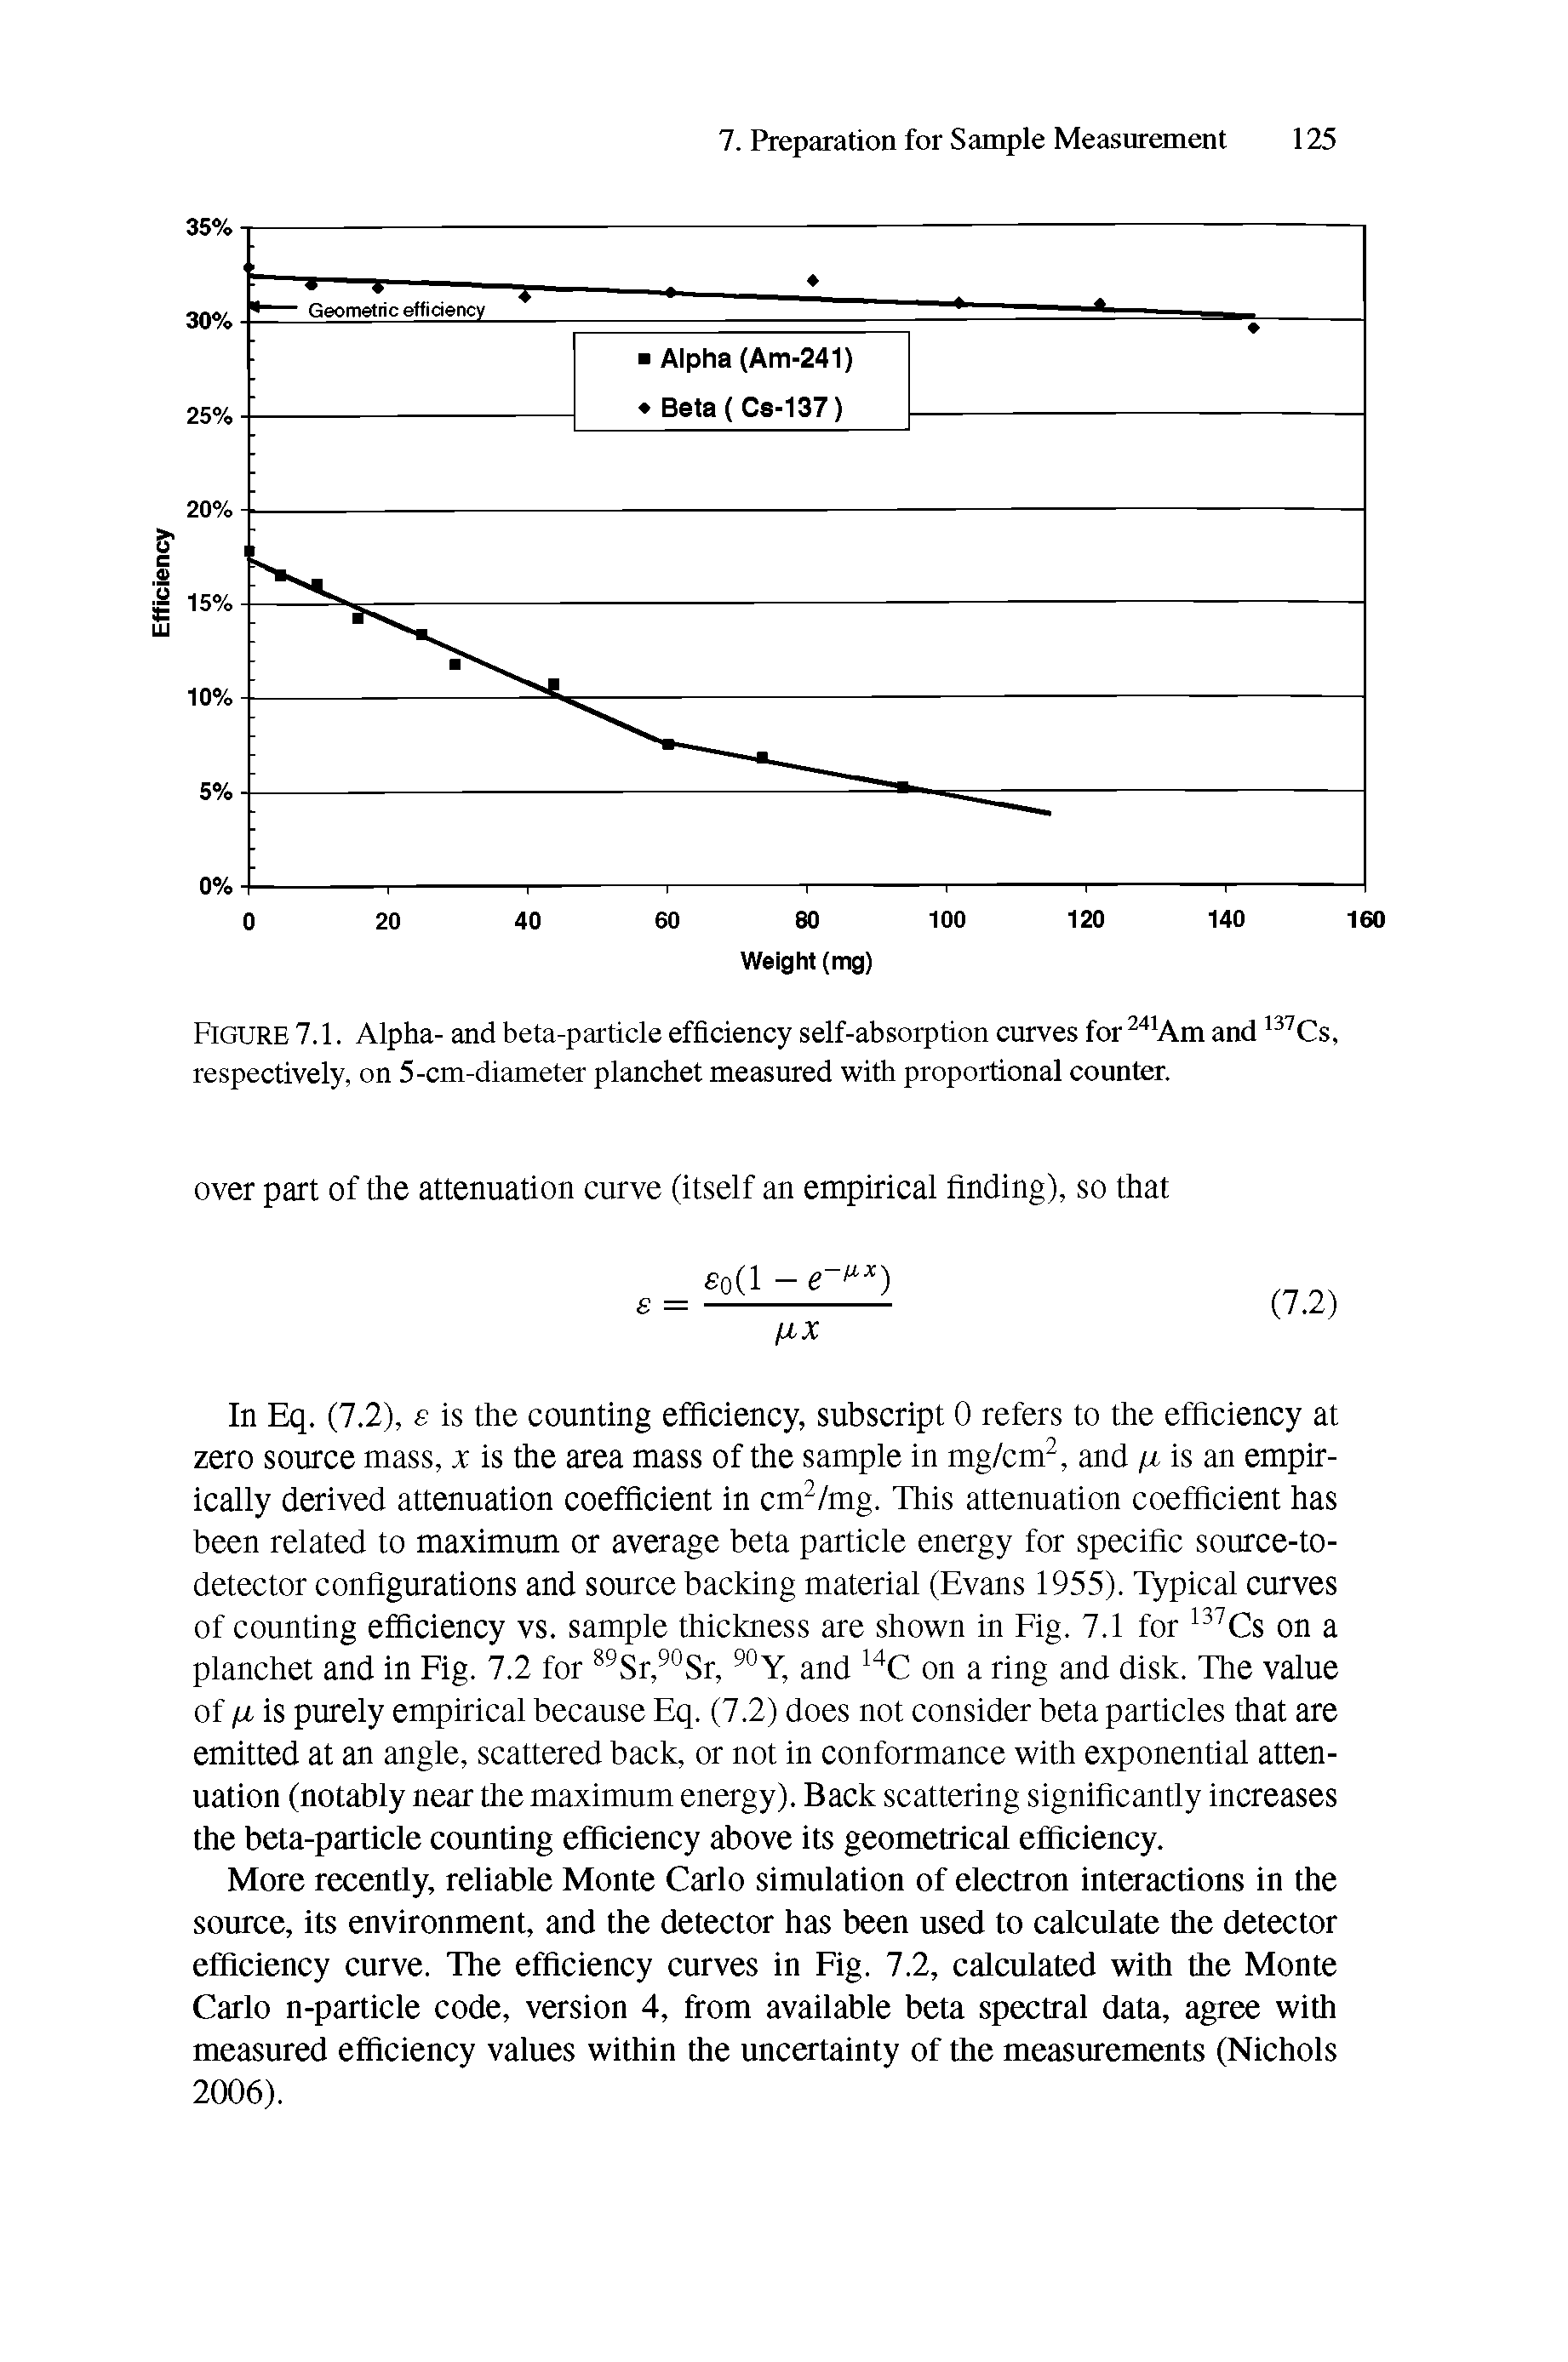 Figure 7.1. Alpha- and beta-particle efficiency self-absorption curves for " Am and Cs, respectively, on 5-cm-diameter planchet measured with proportional counter.